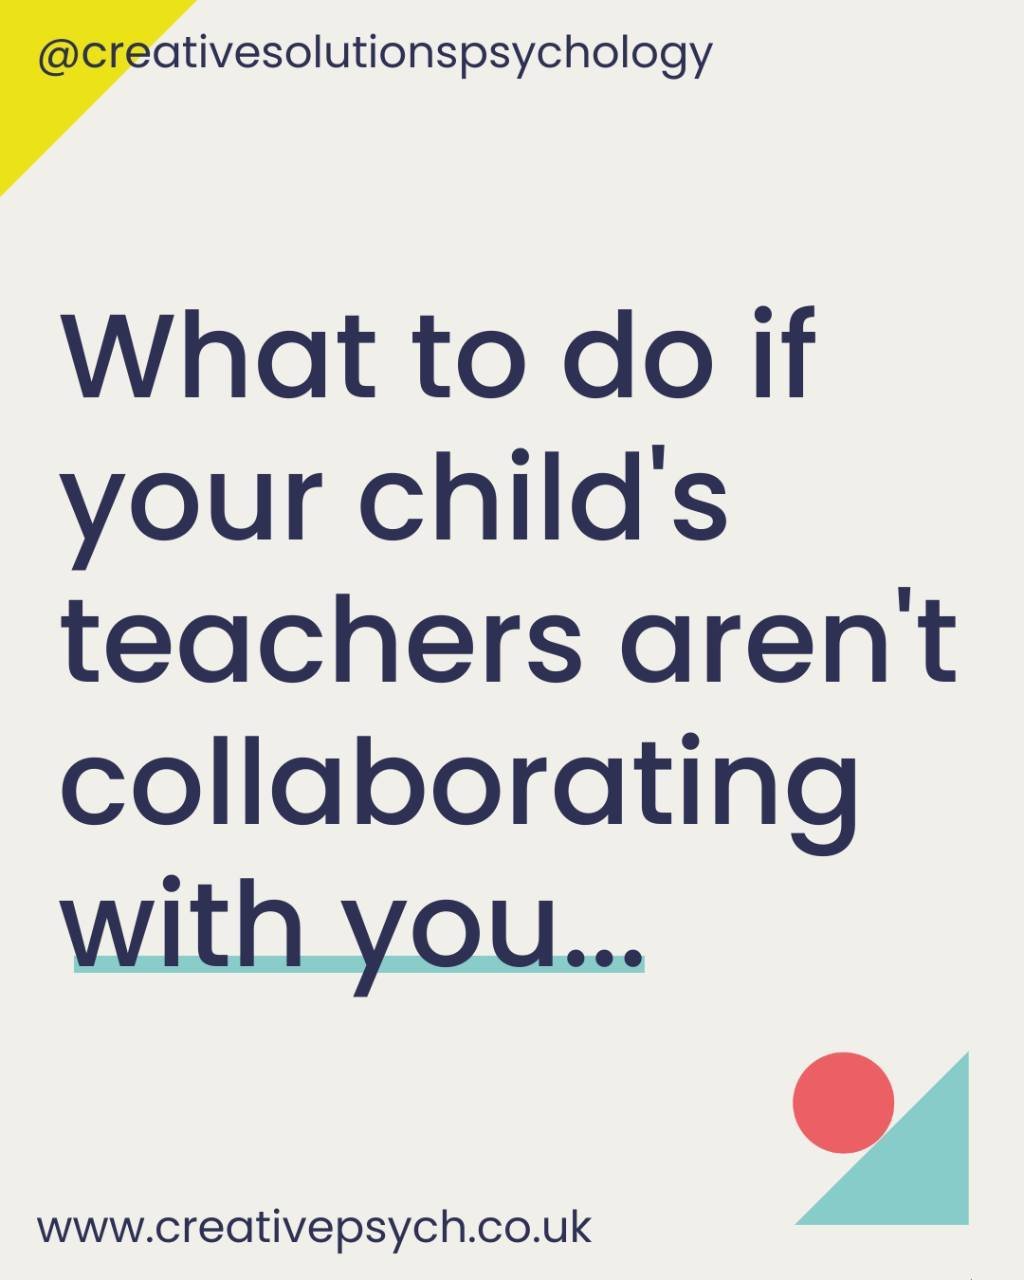 As a child and educational psychologist, I emphasise the critical role of collaboration between parents and teachers in supporting a child's educational journey. 

This is because creating a productive partnership between parents and teachers is esse